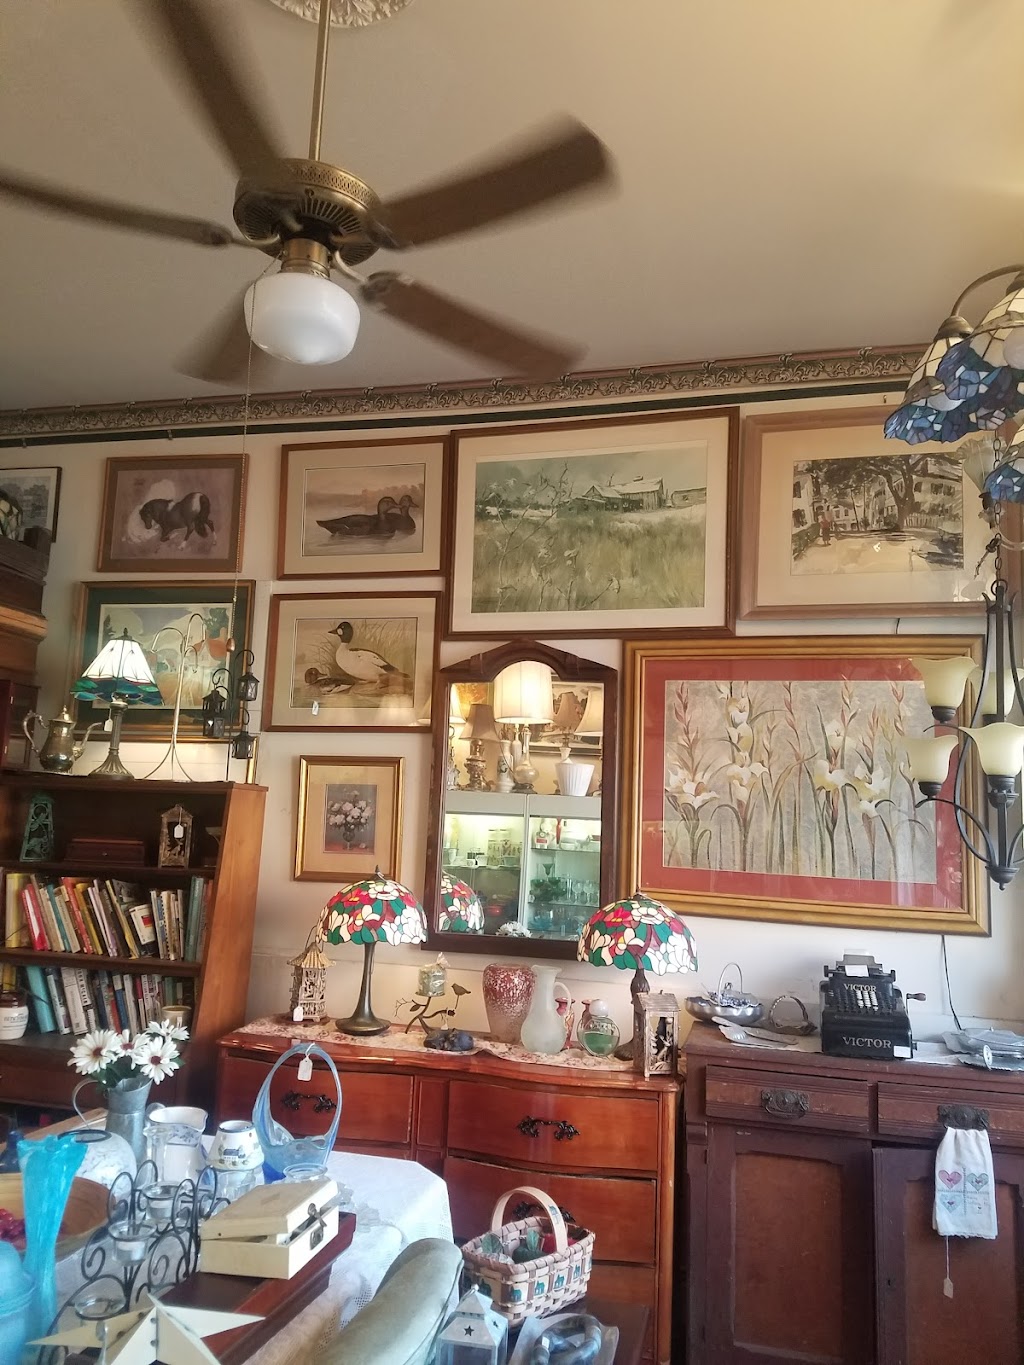 Fabulous Finds Arts and Antiques | 16 Greenwich St, Belvidere, NJ 07823 | Phone: (732) 771-6089